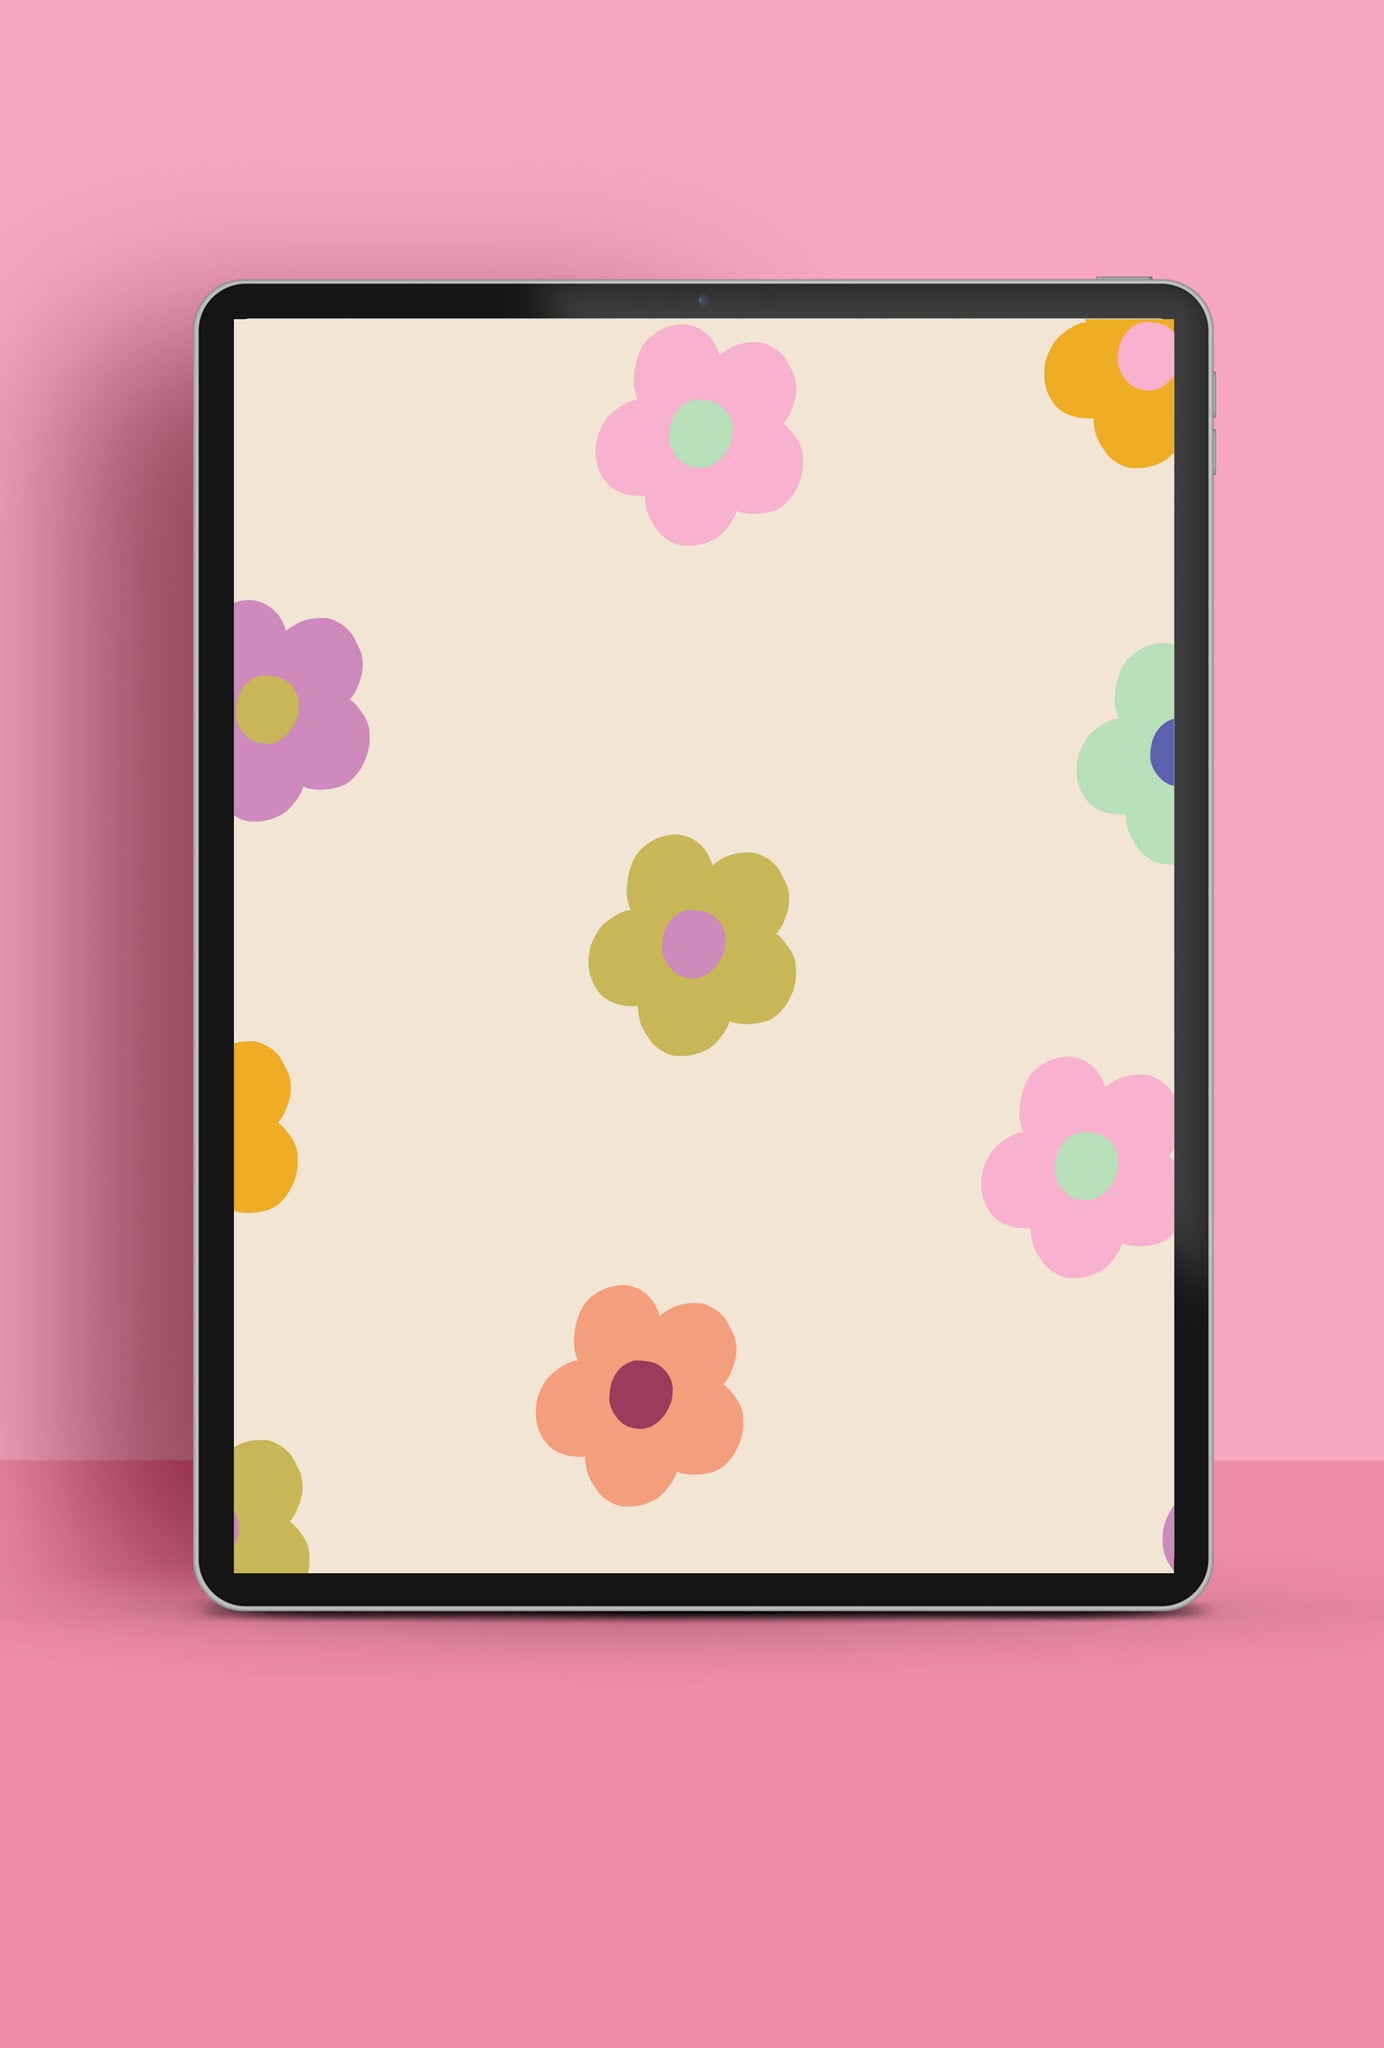 Colourful Daisies Free HD Tablet Wallpaper Download | Raspberry Blossom